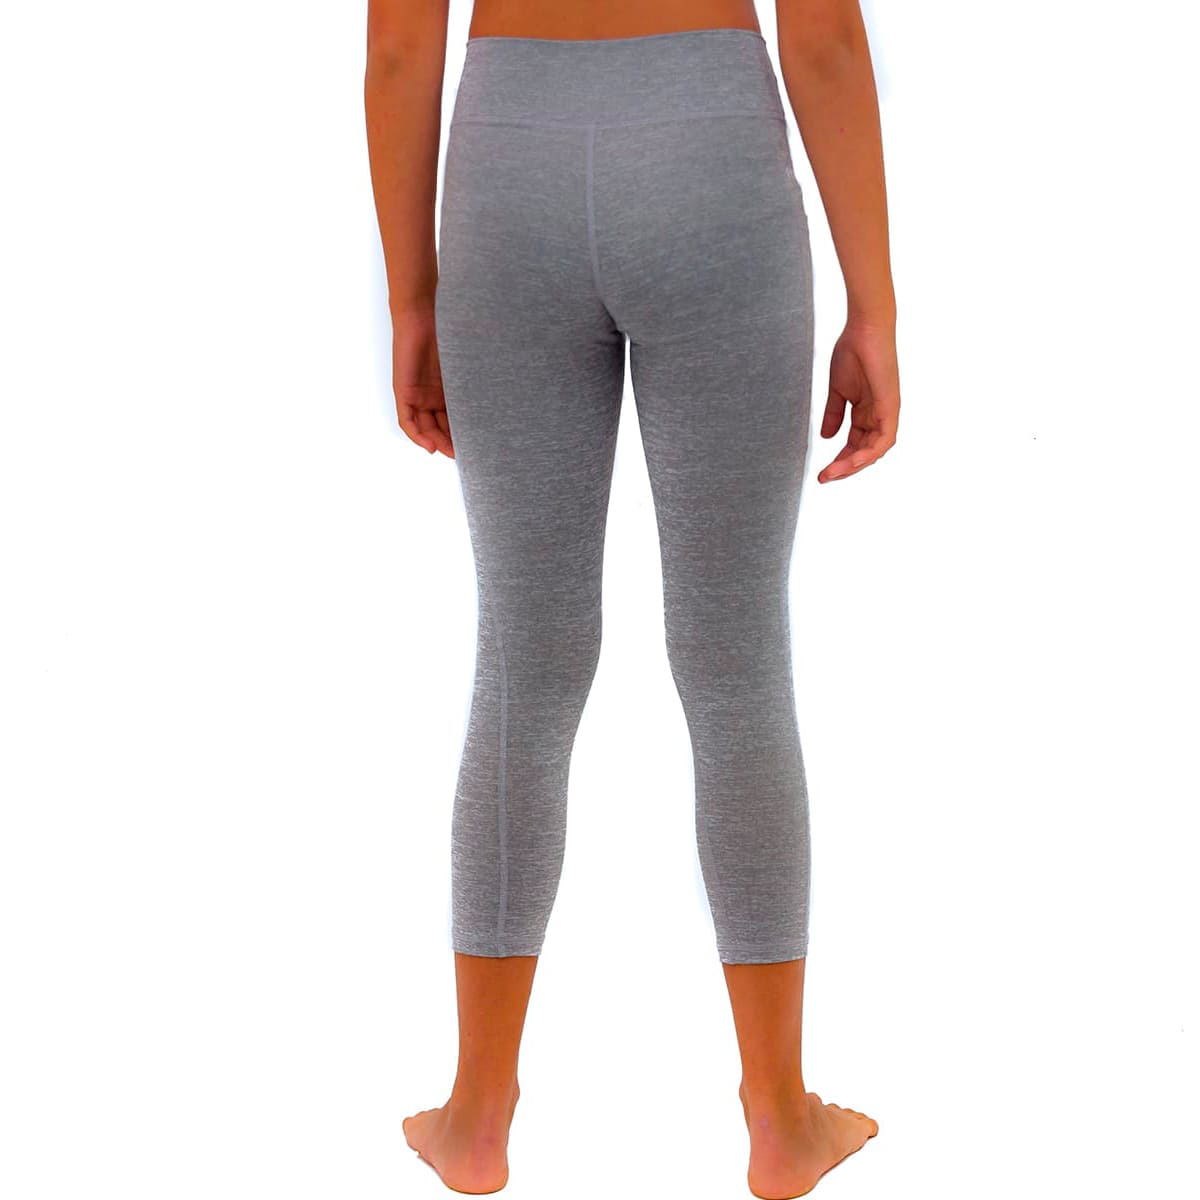 High Waist Glossy Shiny Silver Grey Silver Leggings Womens For Yoga,  Jogging, And Fitness 230505 From Kong00, $41.06